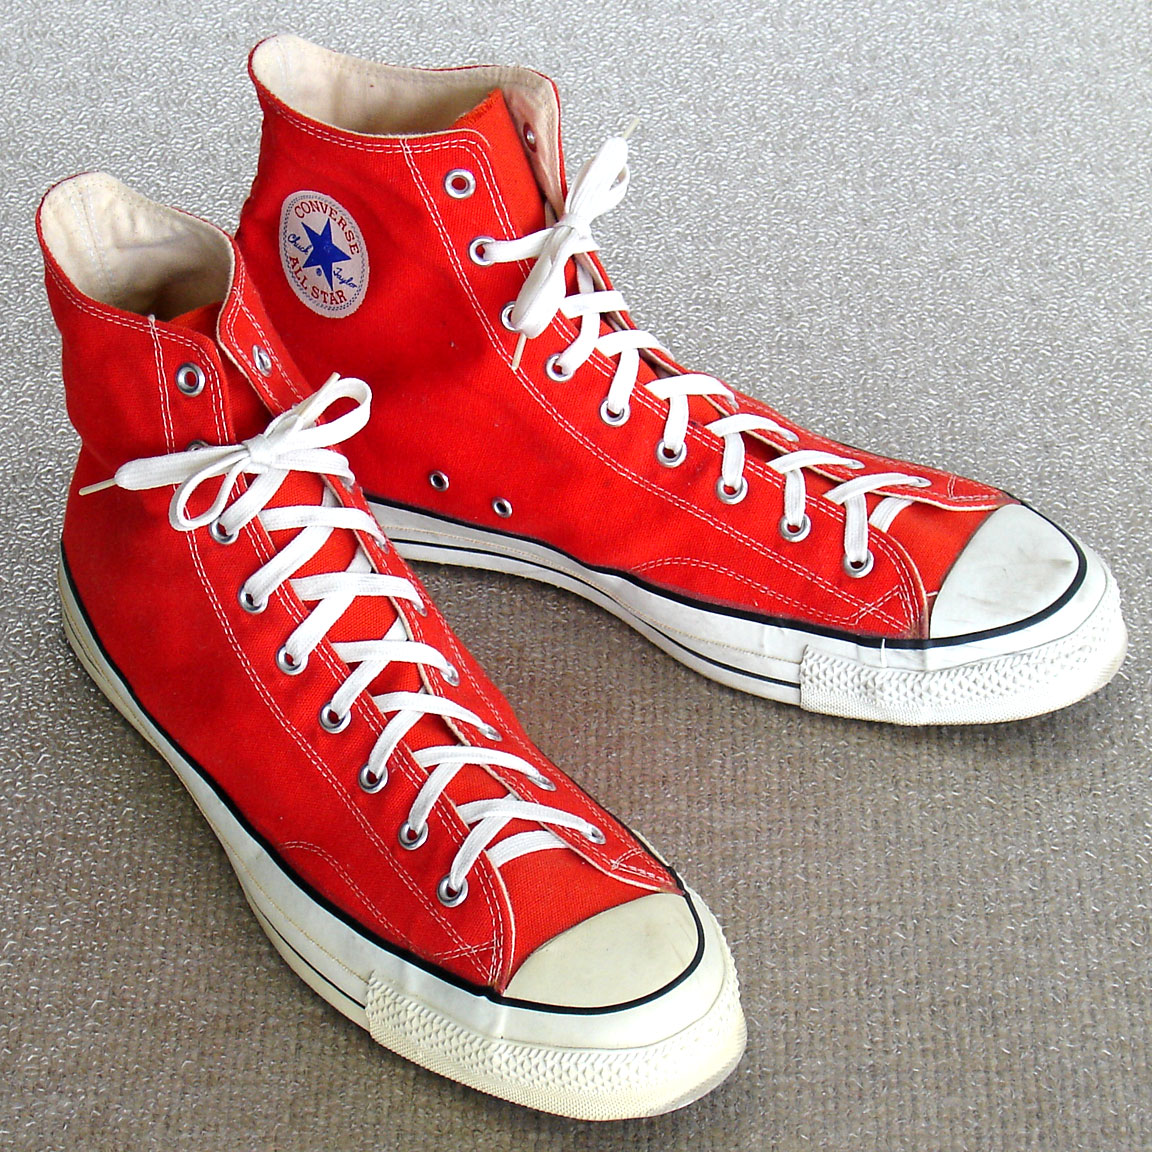 Huge, size 16 Vintage American-made Converse All Star Chuck Taylor shoes for sale at http://www.collectornet.net/shoes